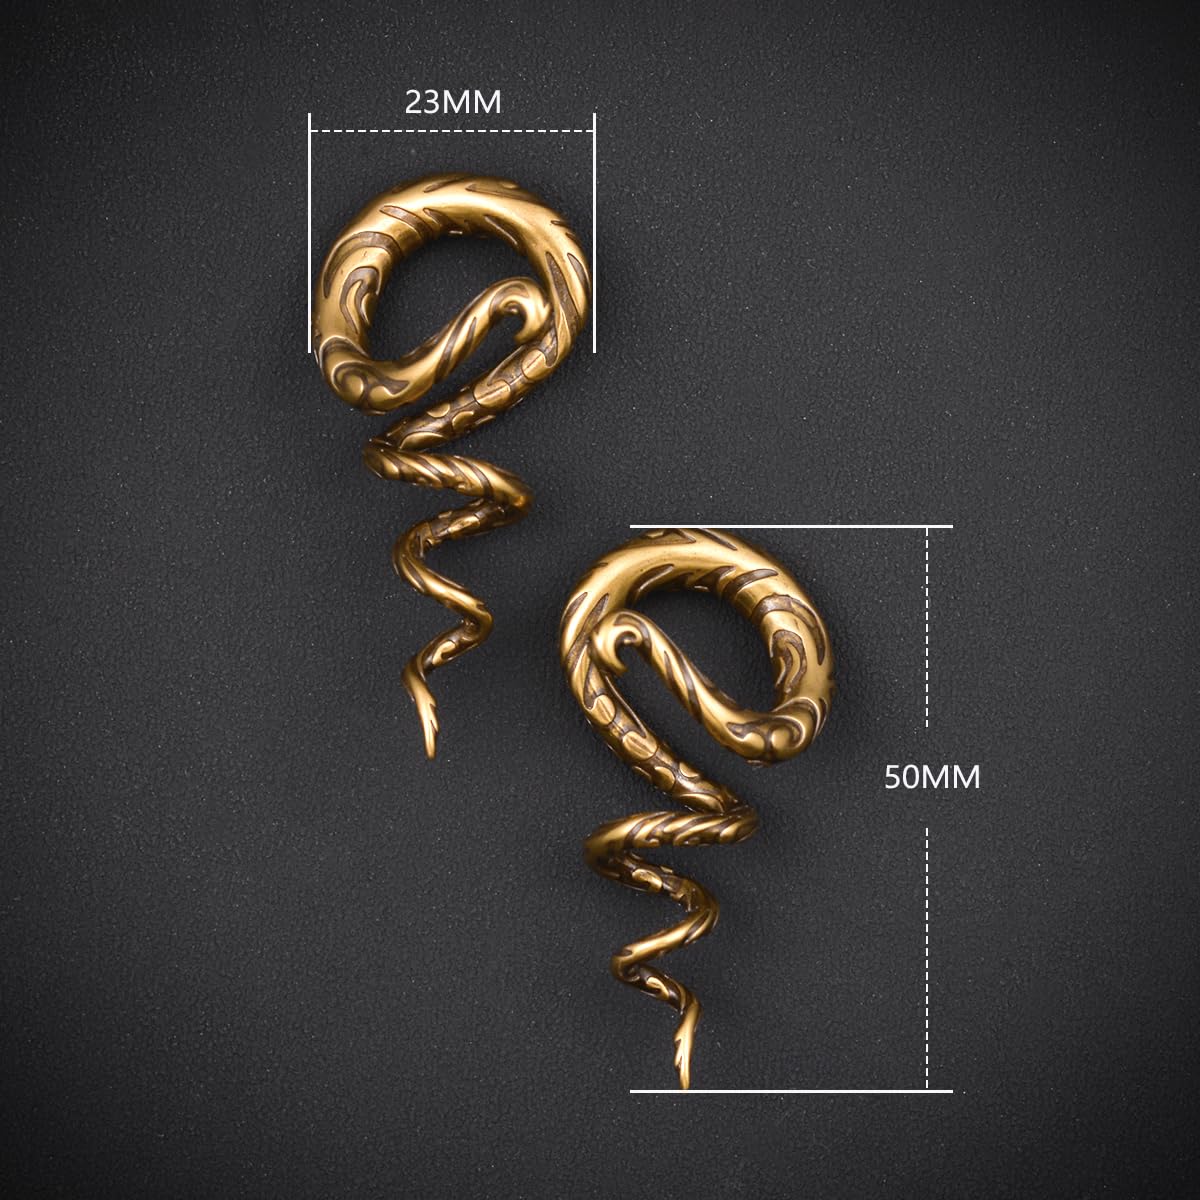 2PCS 2G Ear Sprial Tapers Plug Gauges Brass Ear Stretcher Hangers 6mm Gothic Ear Tunnels Expander Piercing Jewelry